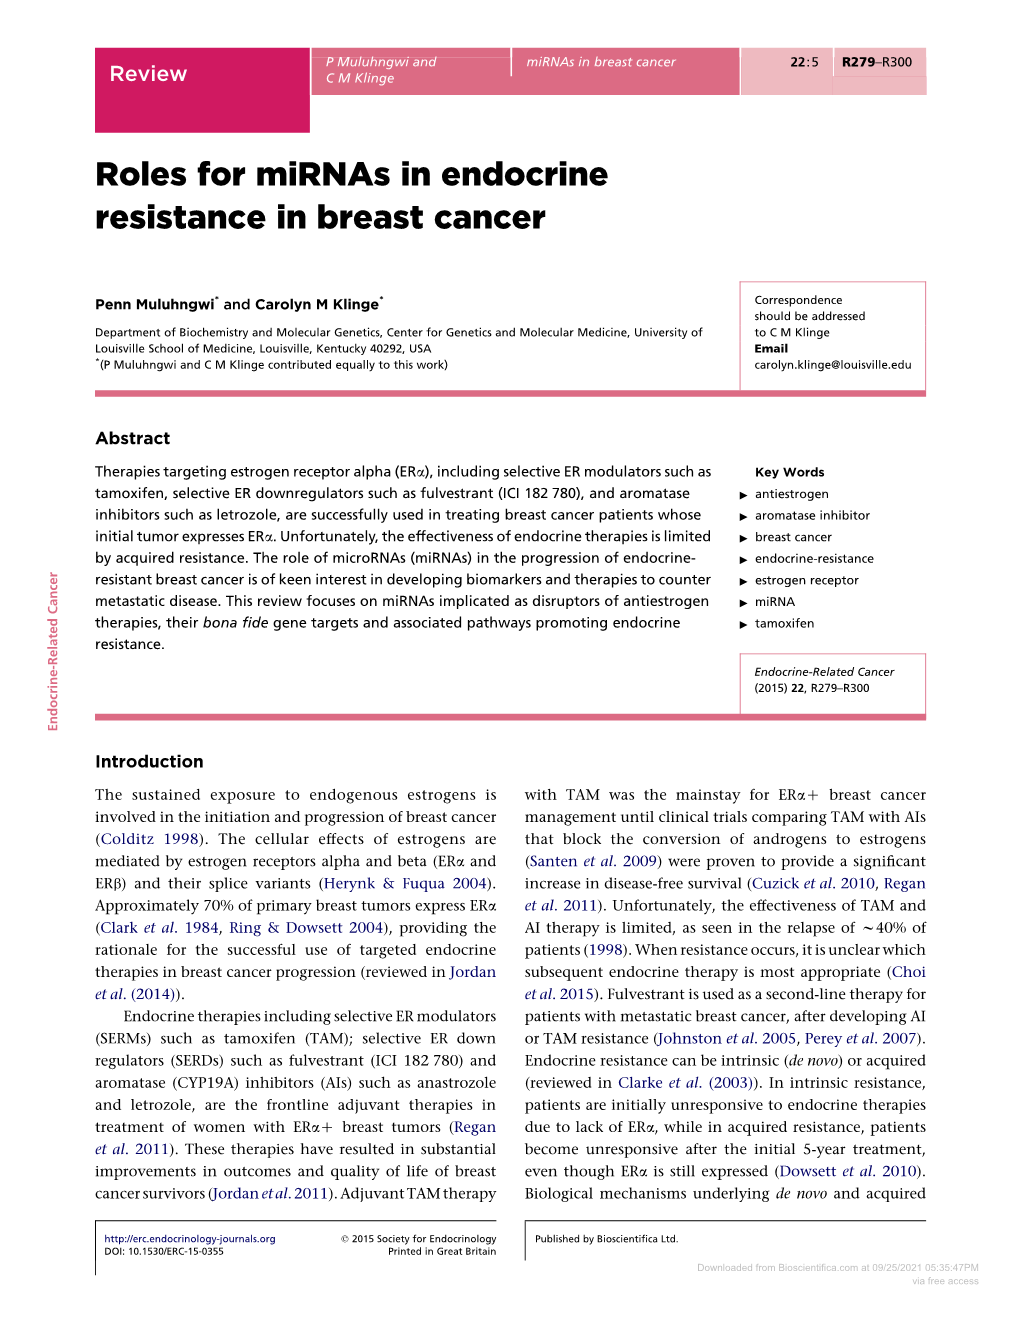 Roles for Mirnas in Endocrine Resistance in Breast Cancer